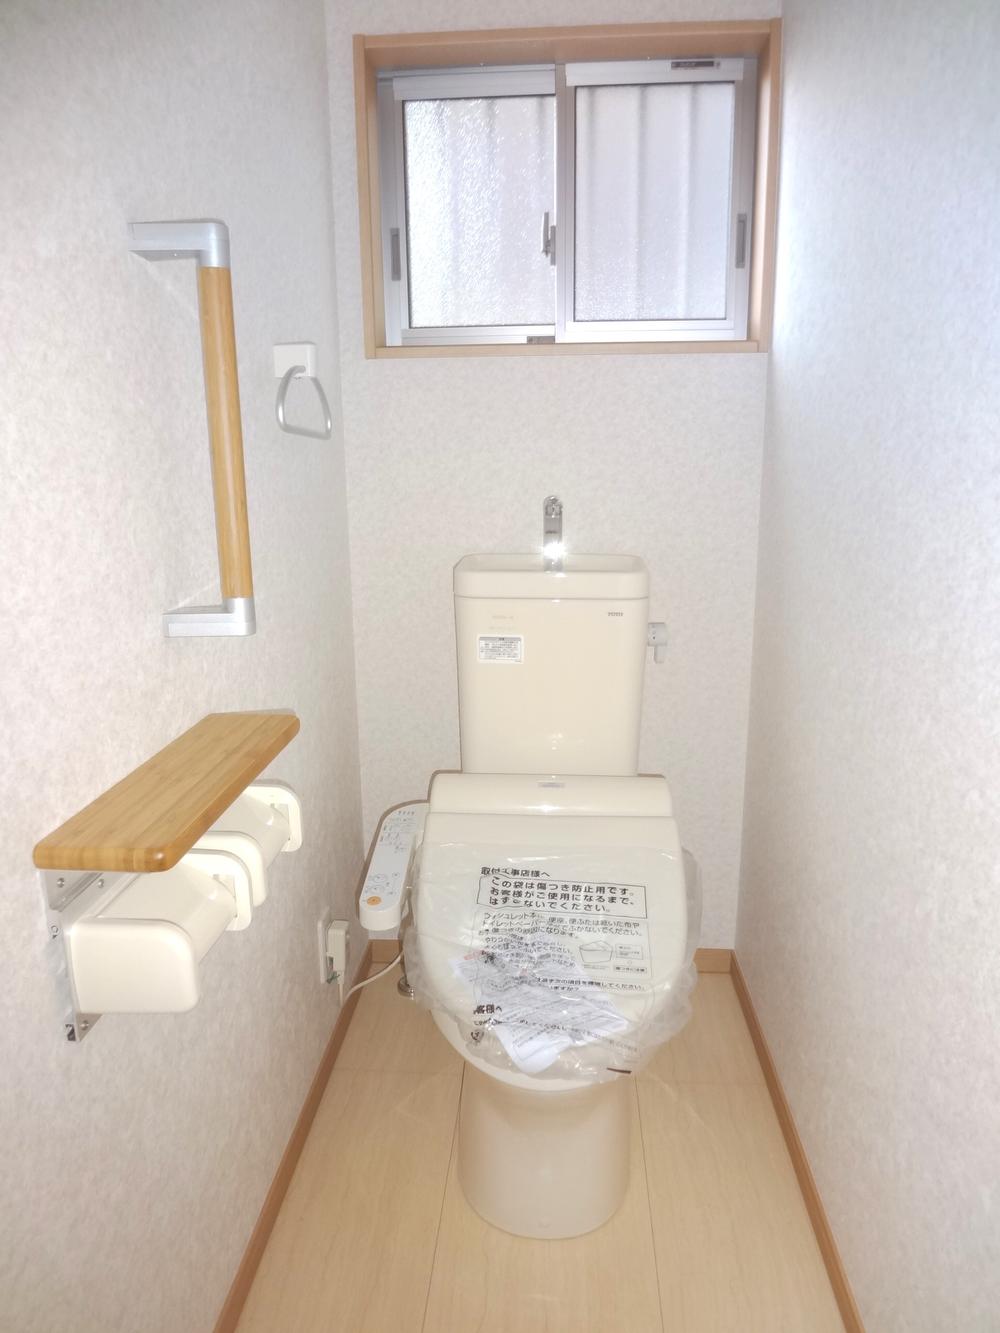 Toilet. Indoor (12 May 2013) Shooting ・ No. 1 destination ◎ 1 floor and the second floor, Toilet is attached to both.